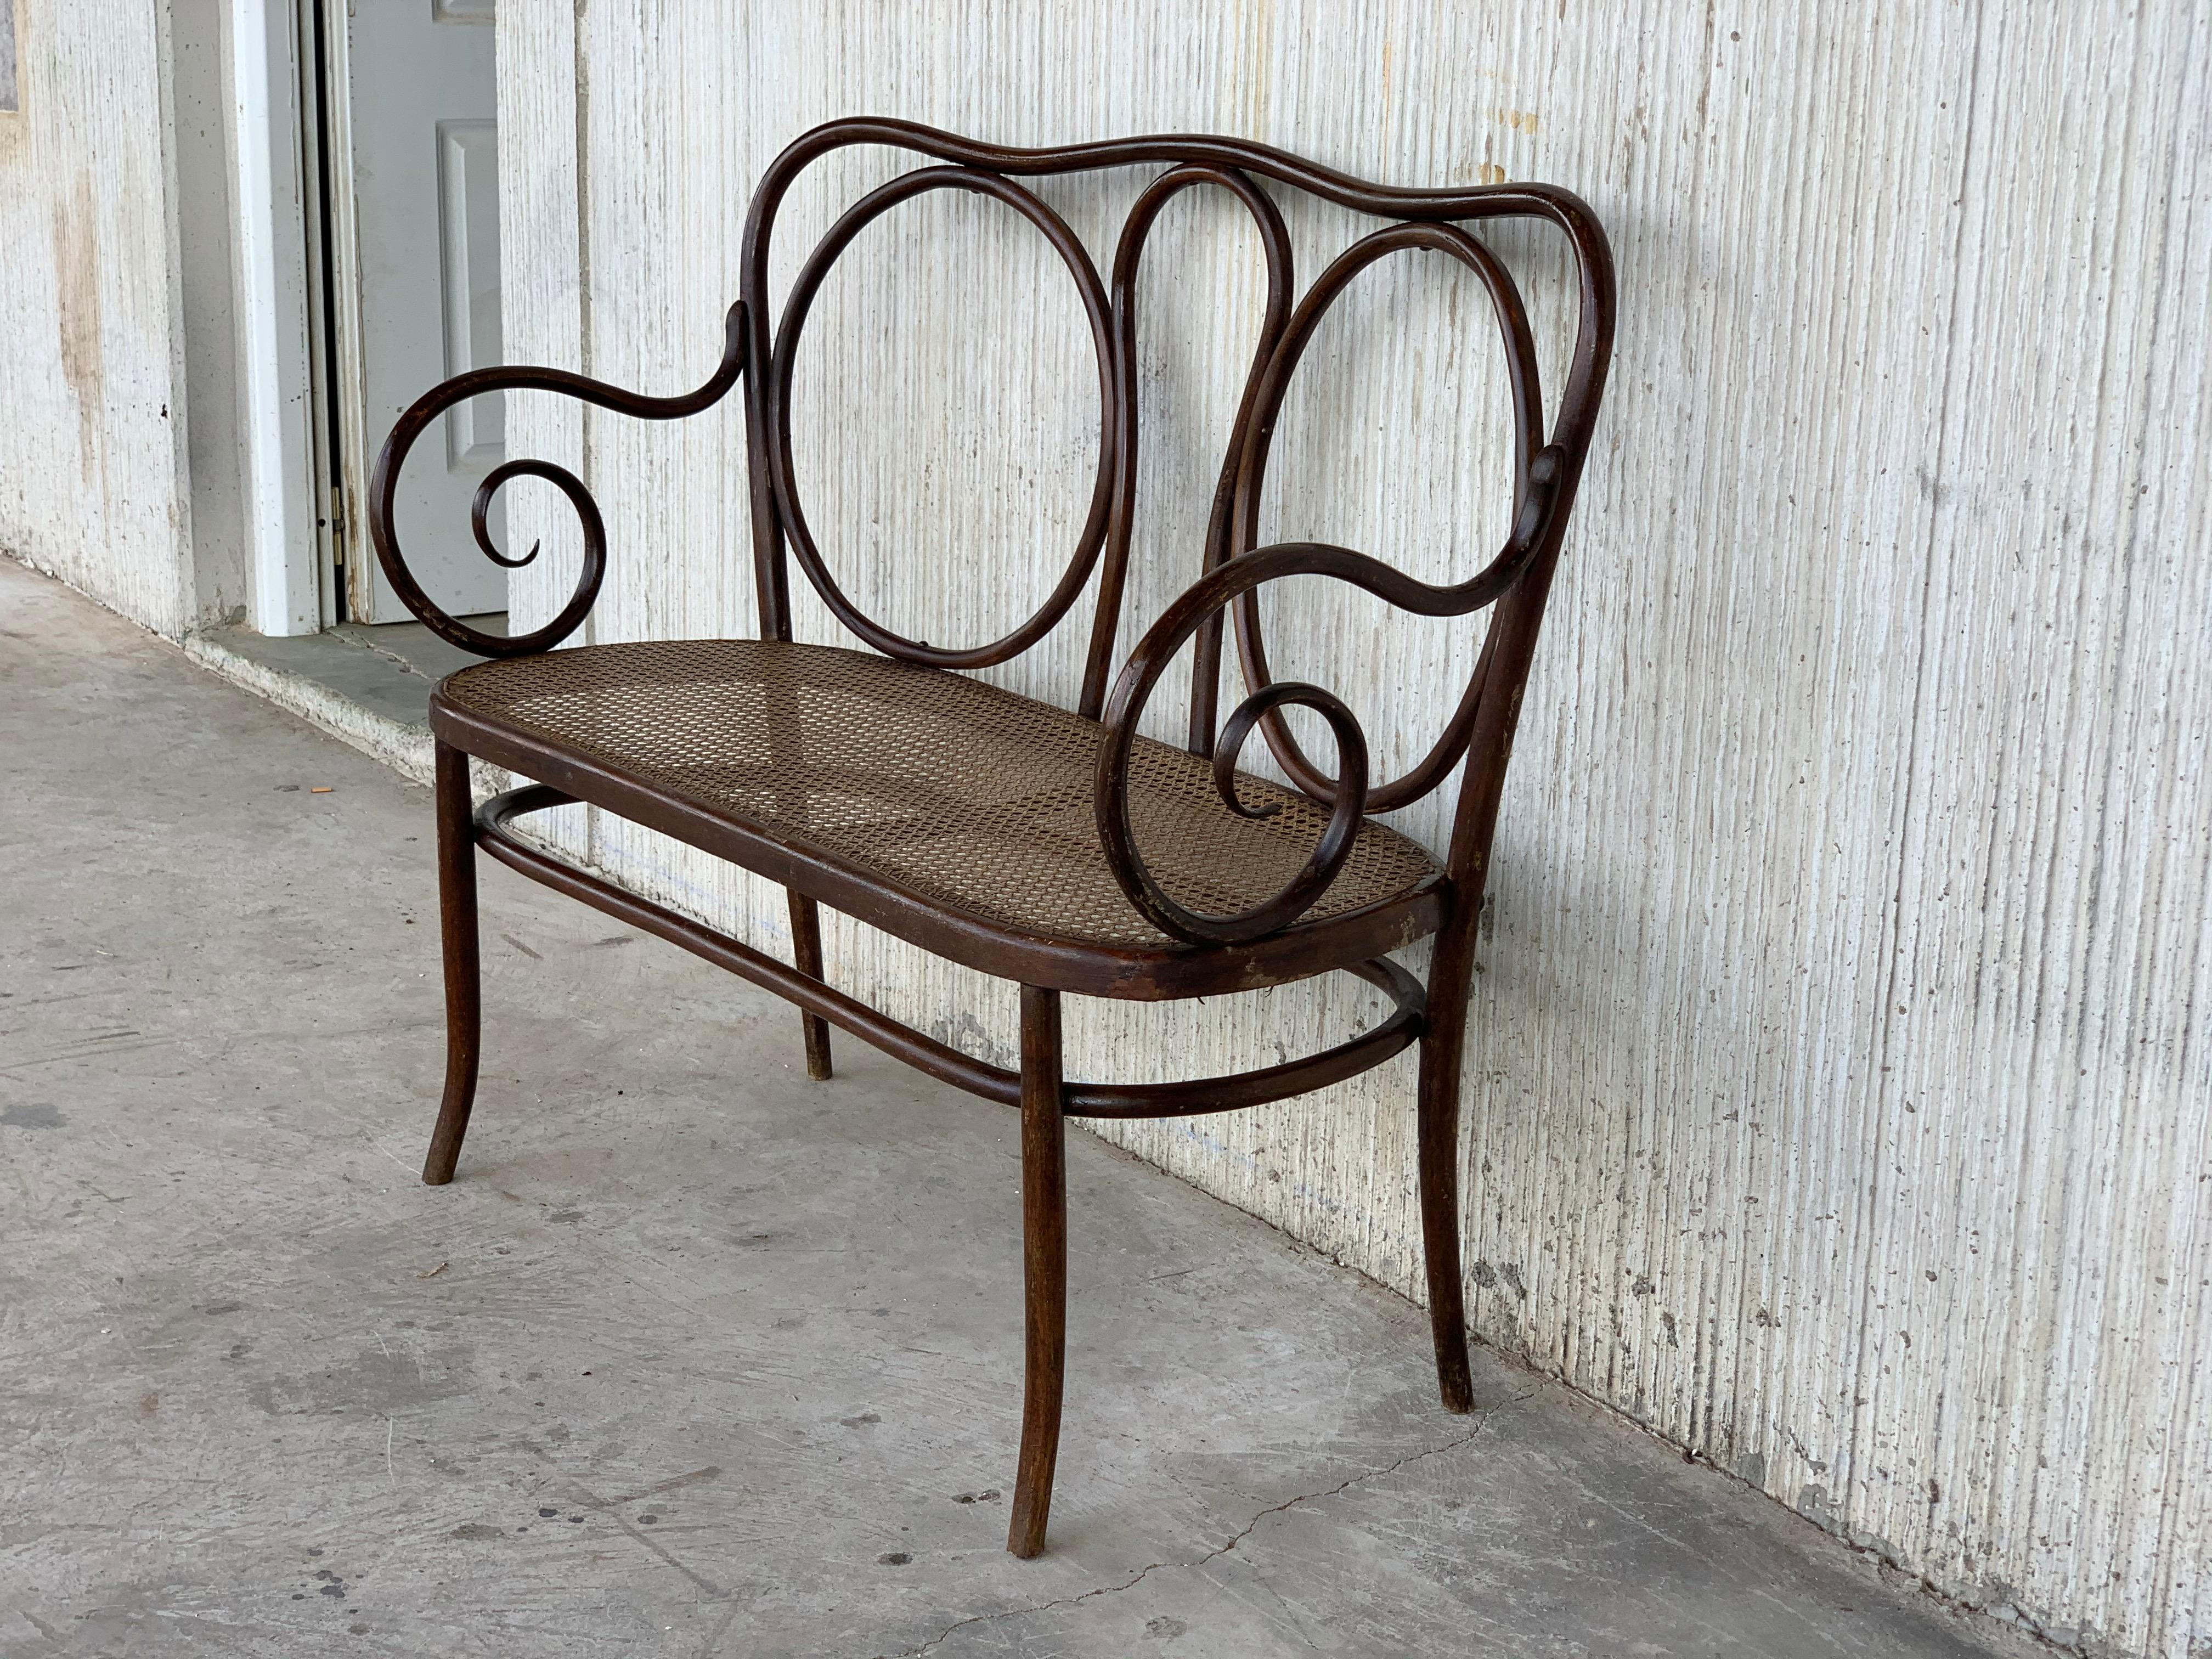 Spanish 20th Century Bentwood Sofa in the Thonet Style, circa 1925, Caned Seat